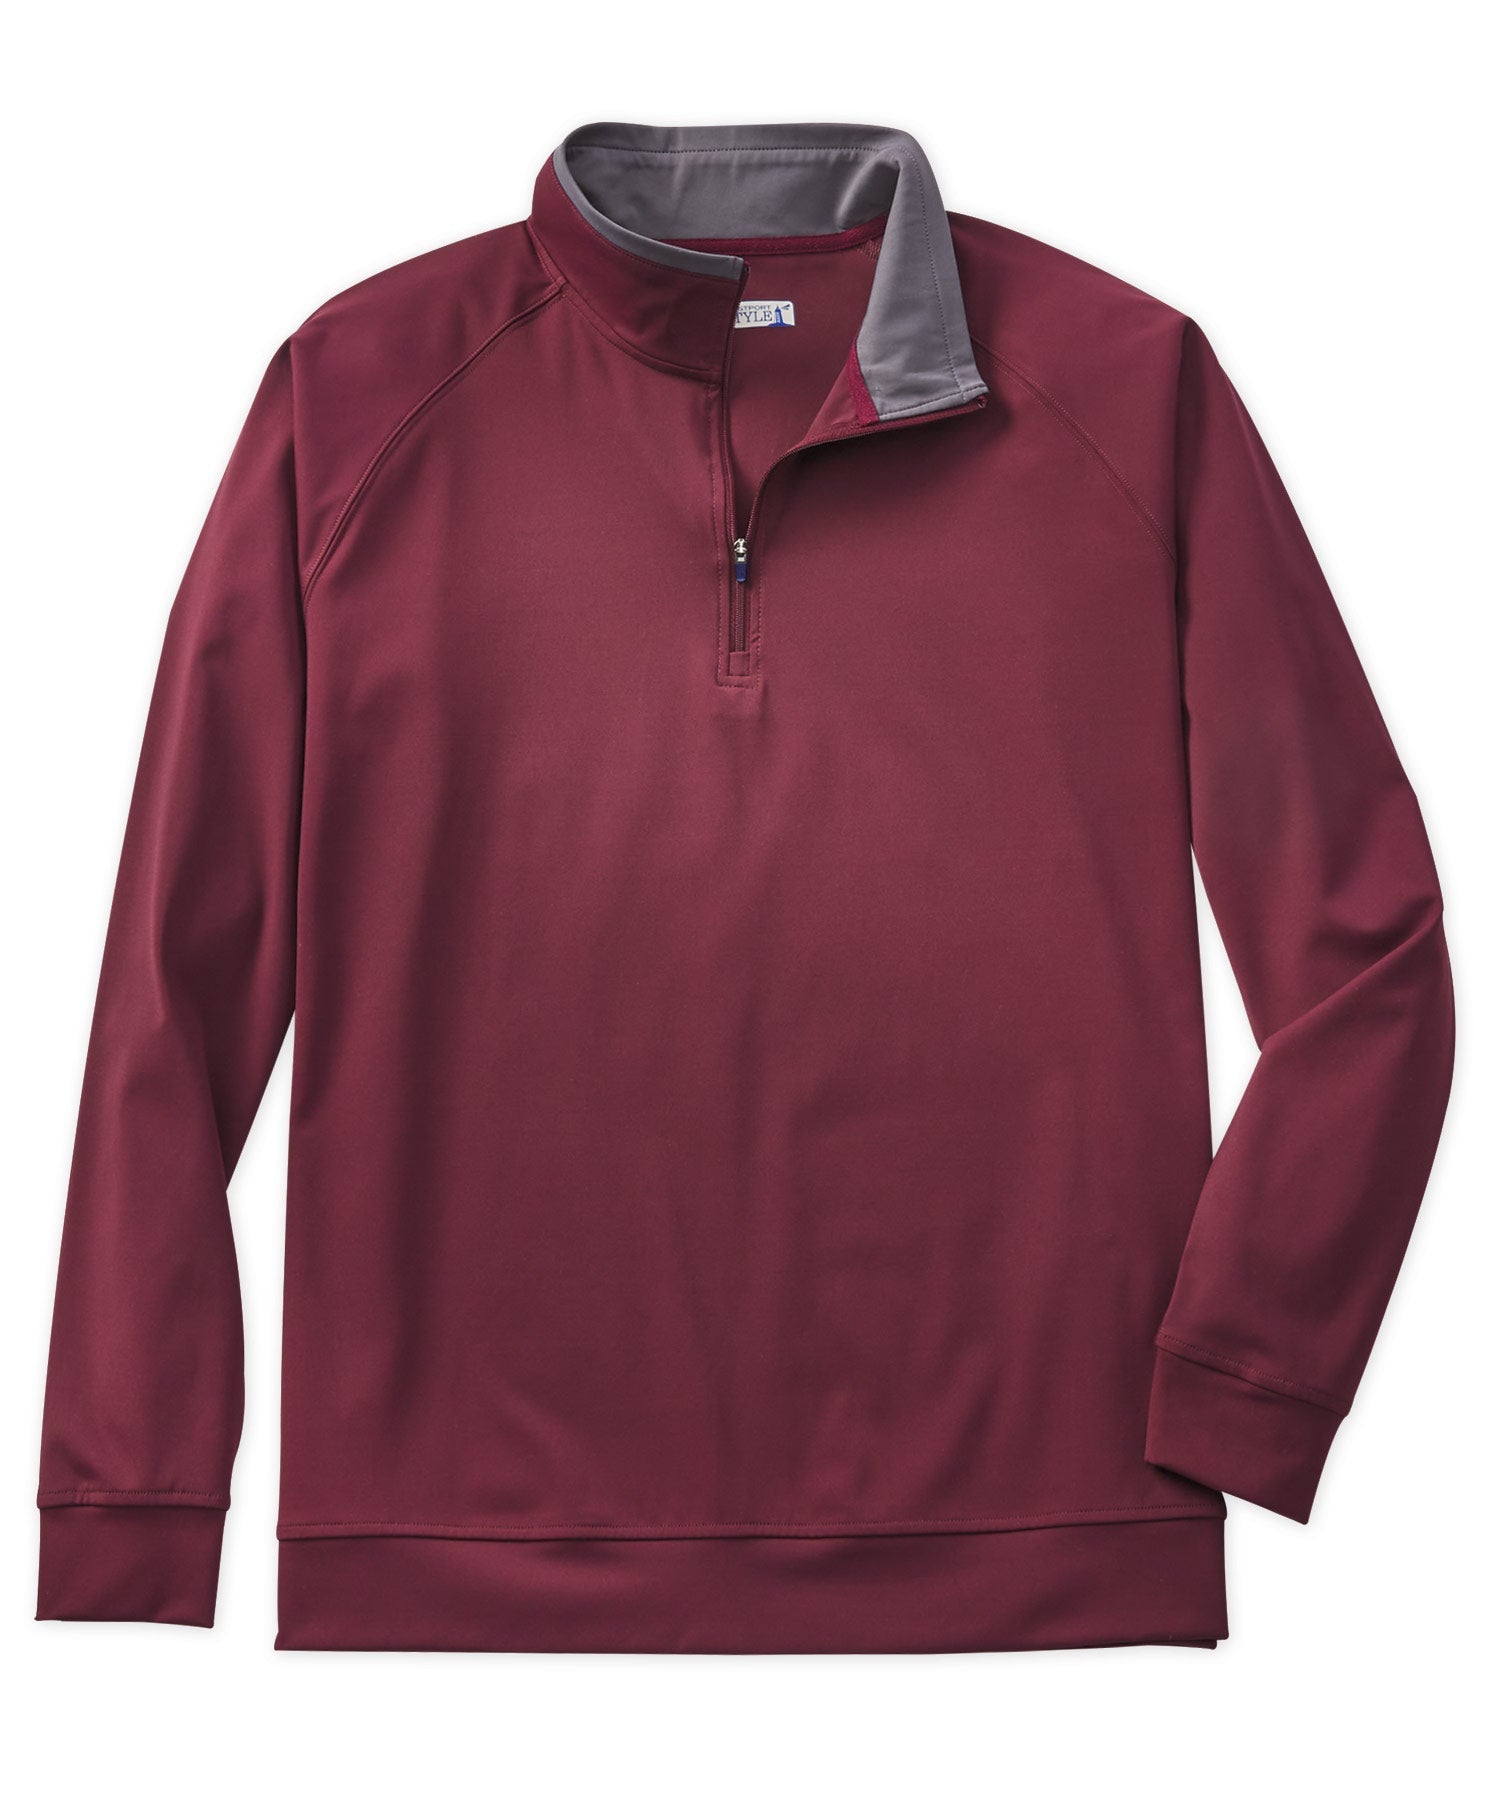 Under Armour Cold Gear Women's Small Jacket Full Zip Burgundy